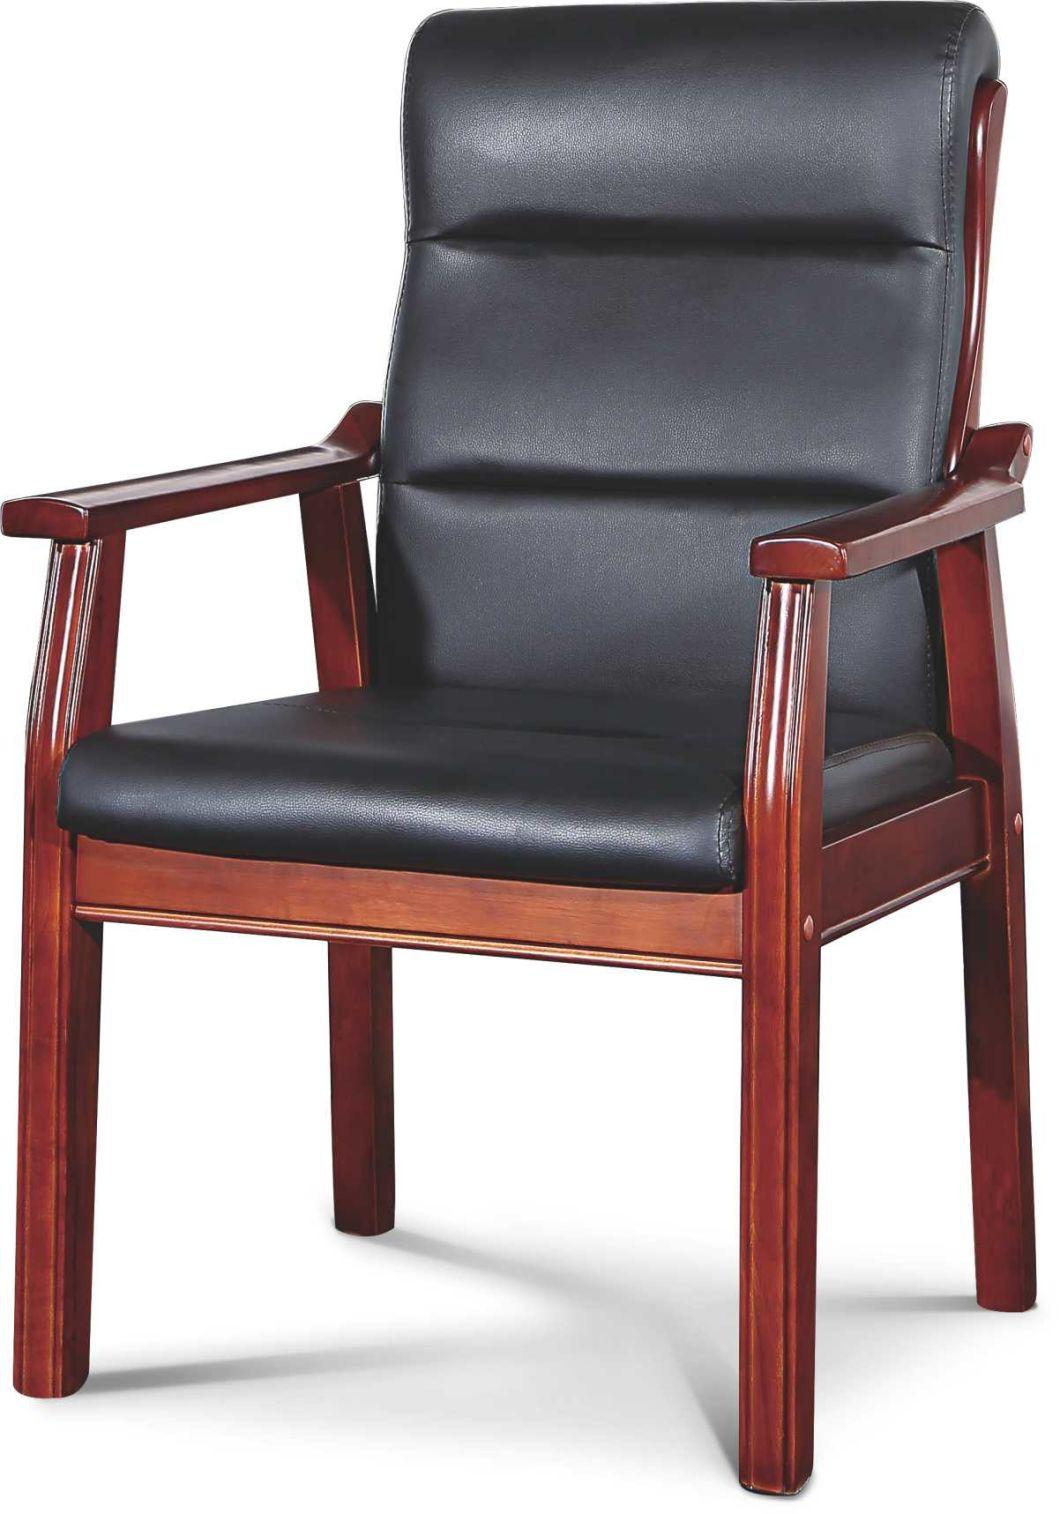 Conference Boardroom Visitor Office PU Leather Chair with Wooden Armrest and Legs